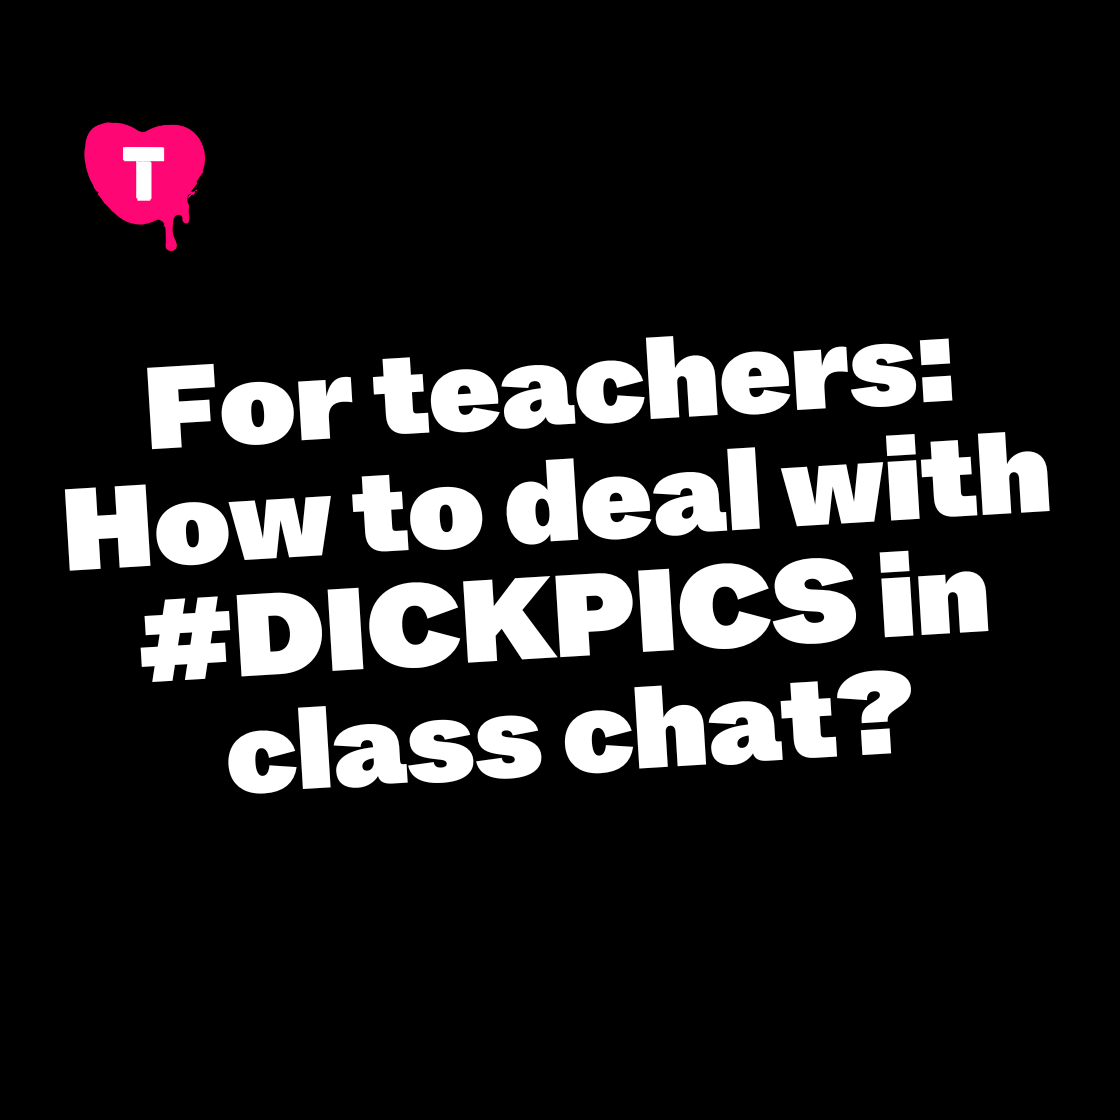 For teachers: How to deal with #DICKPICS in class chat?